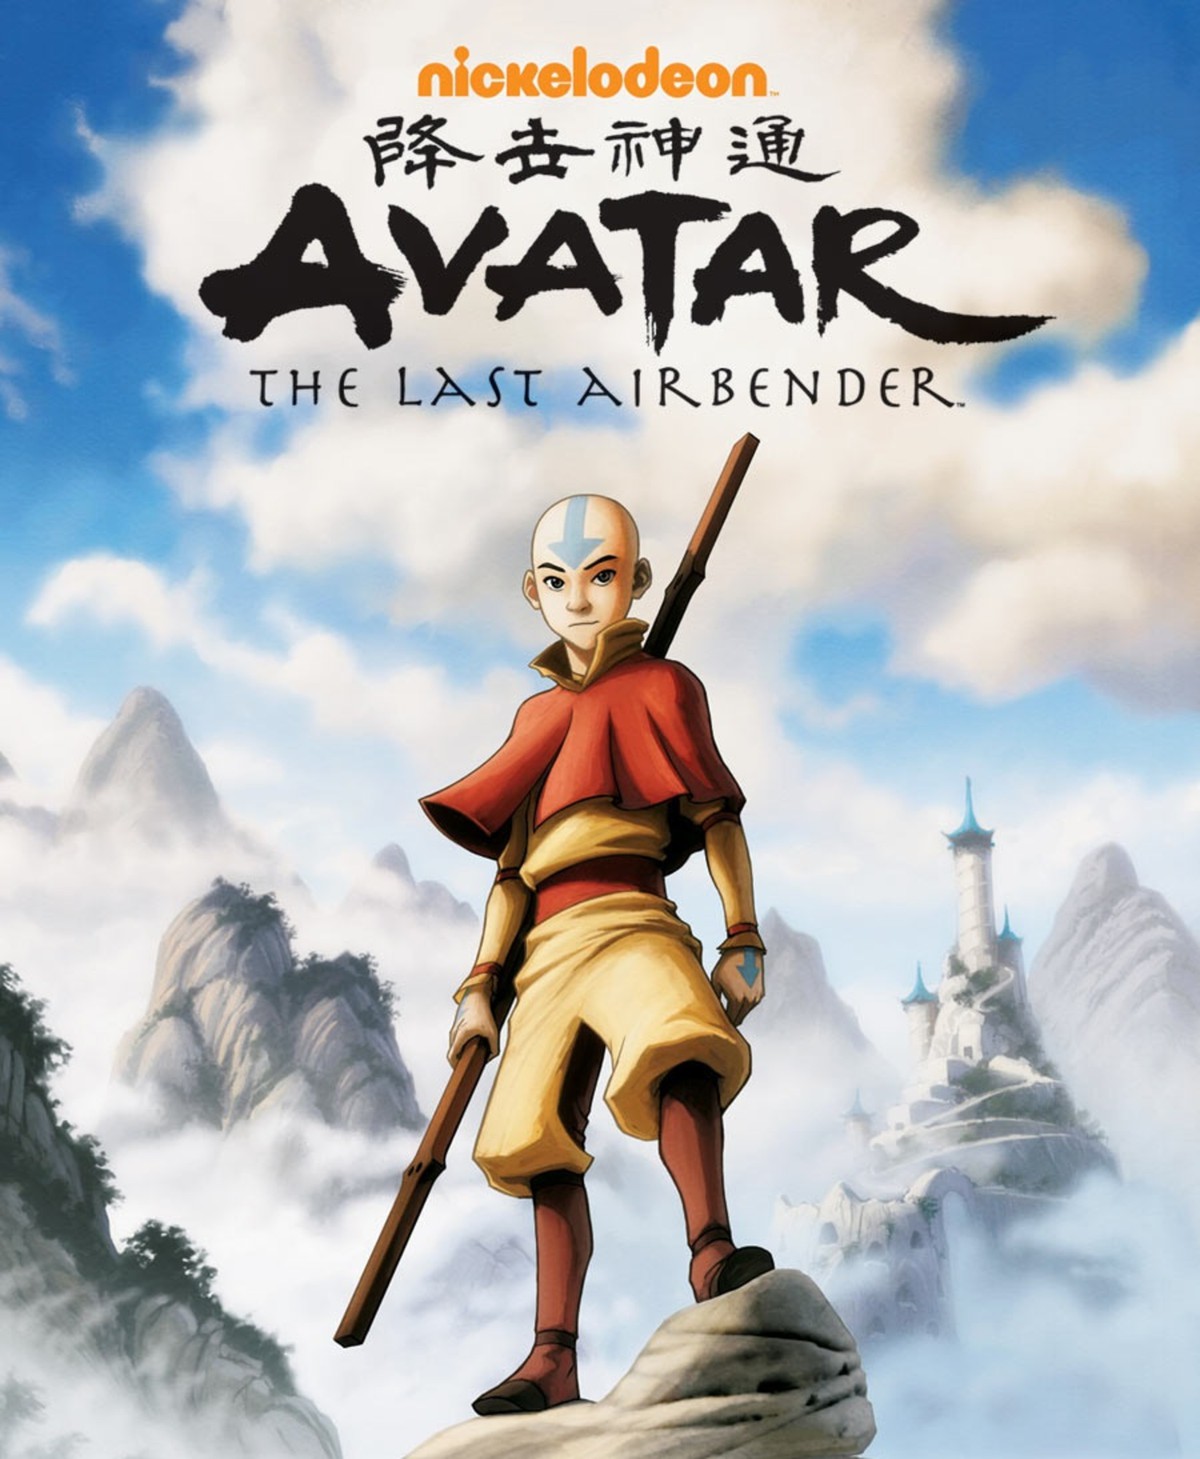 AVATAR THE LAST AIRBENDER Series Coming to Bluray!